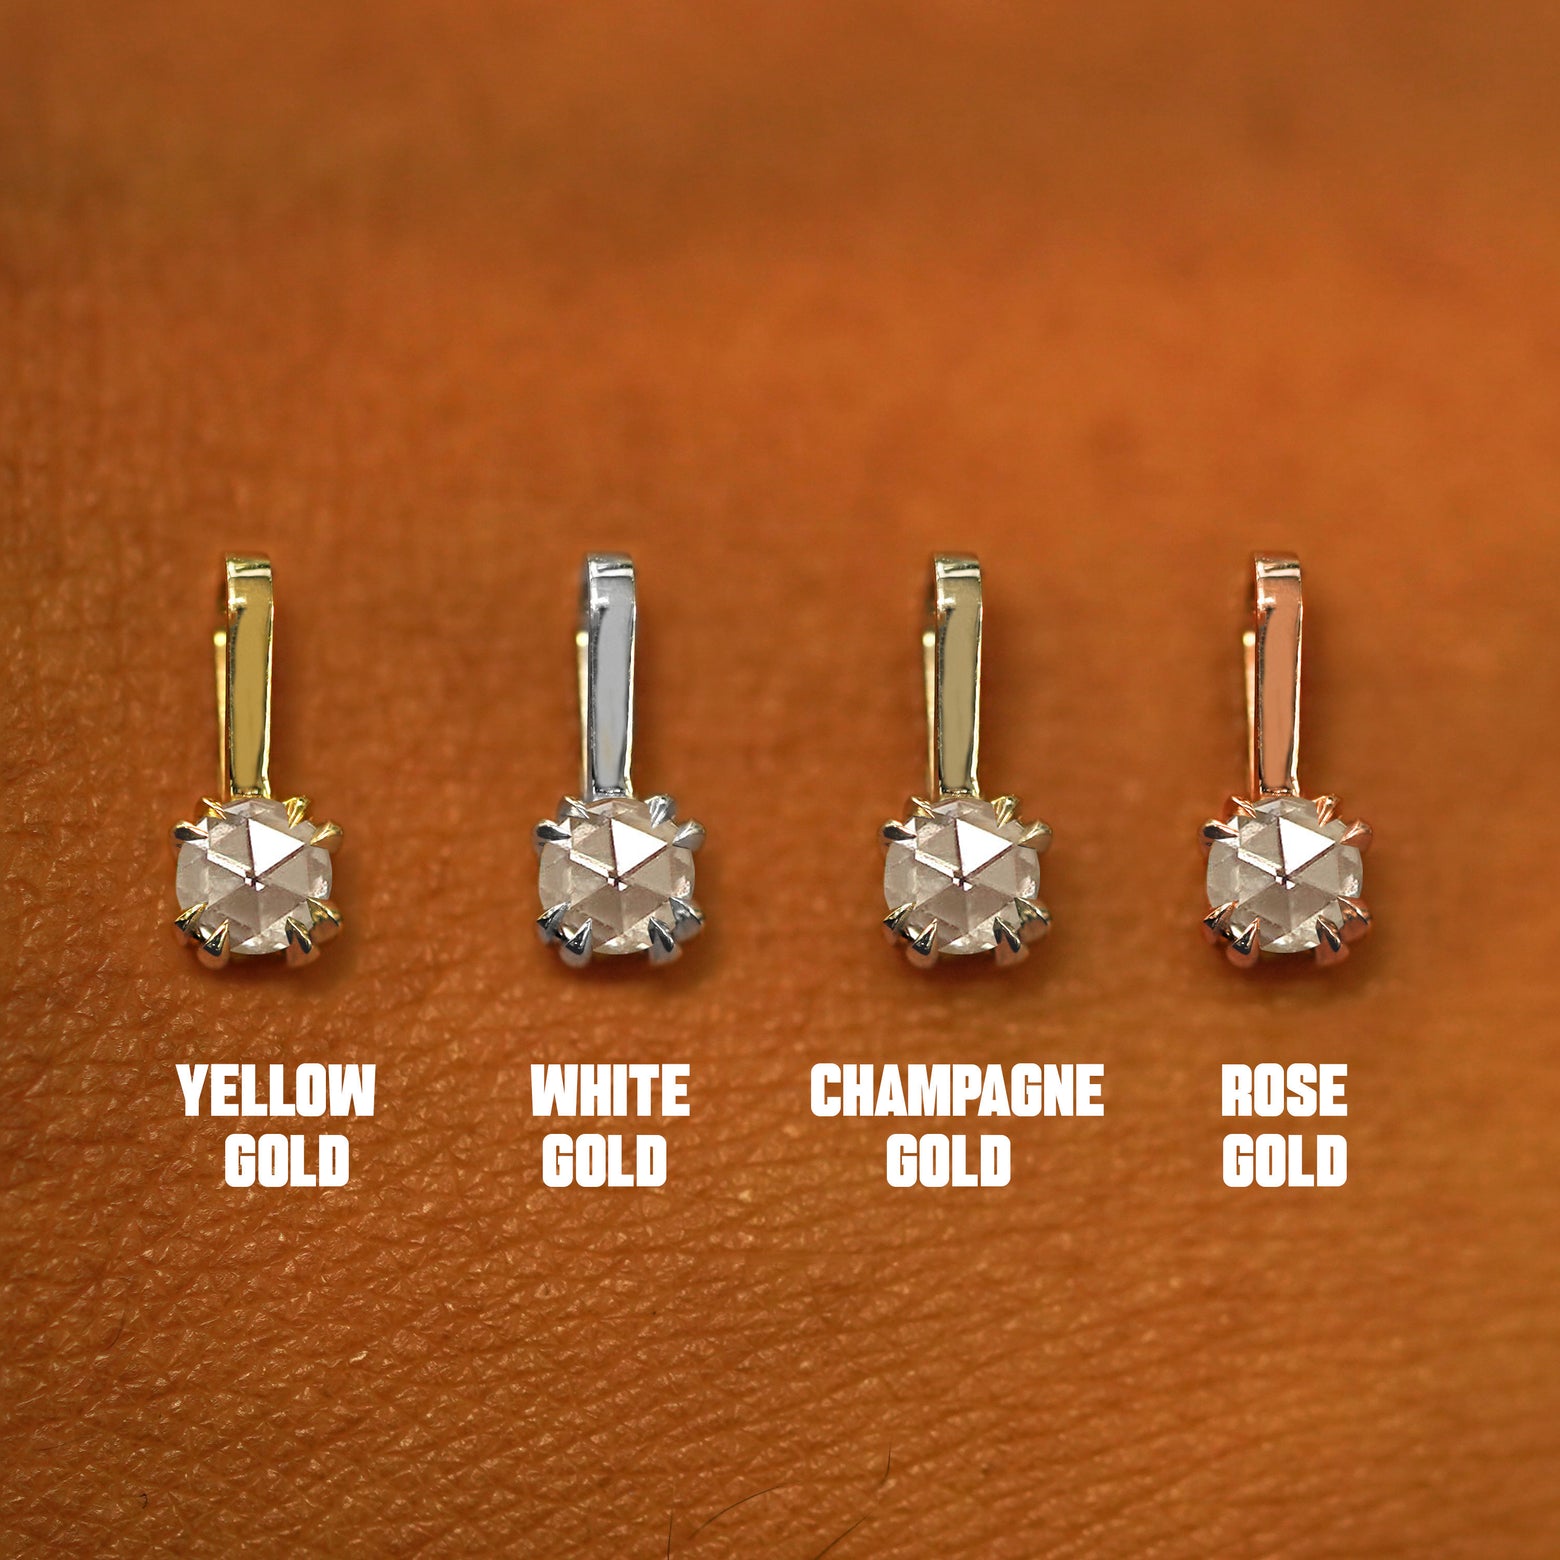 Four versions of the Rose Cut Diamond Charm shown in options of yellow, white, rose, and champagne gold